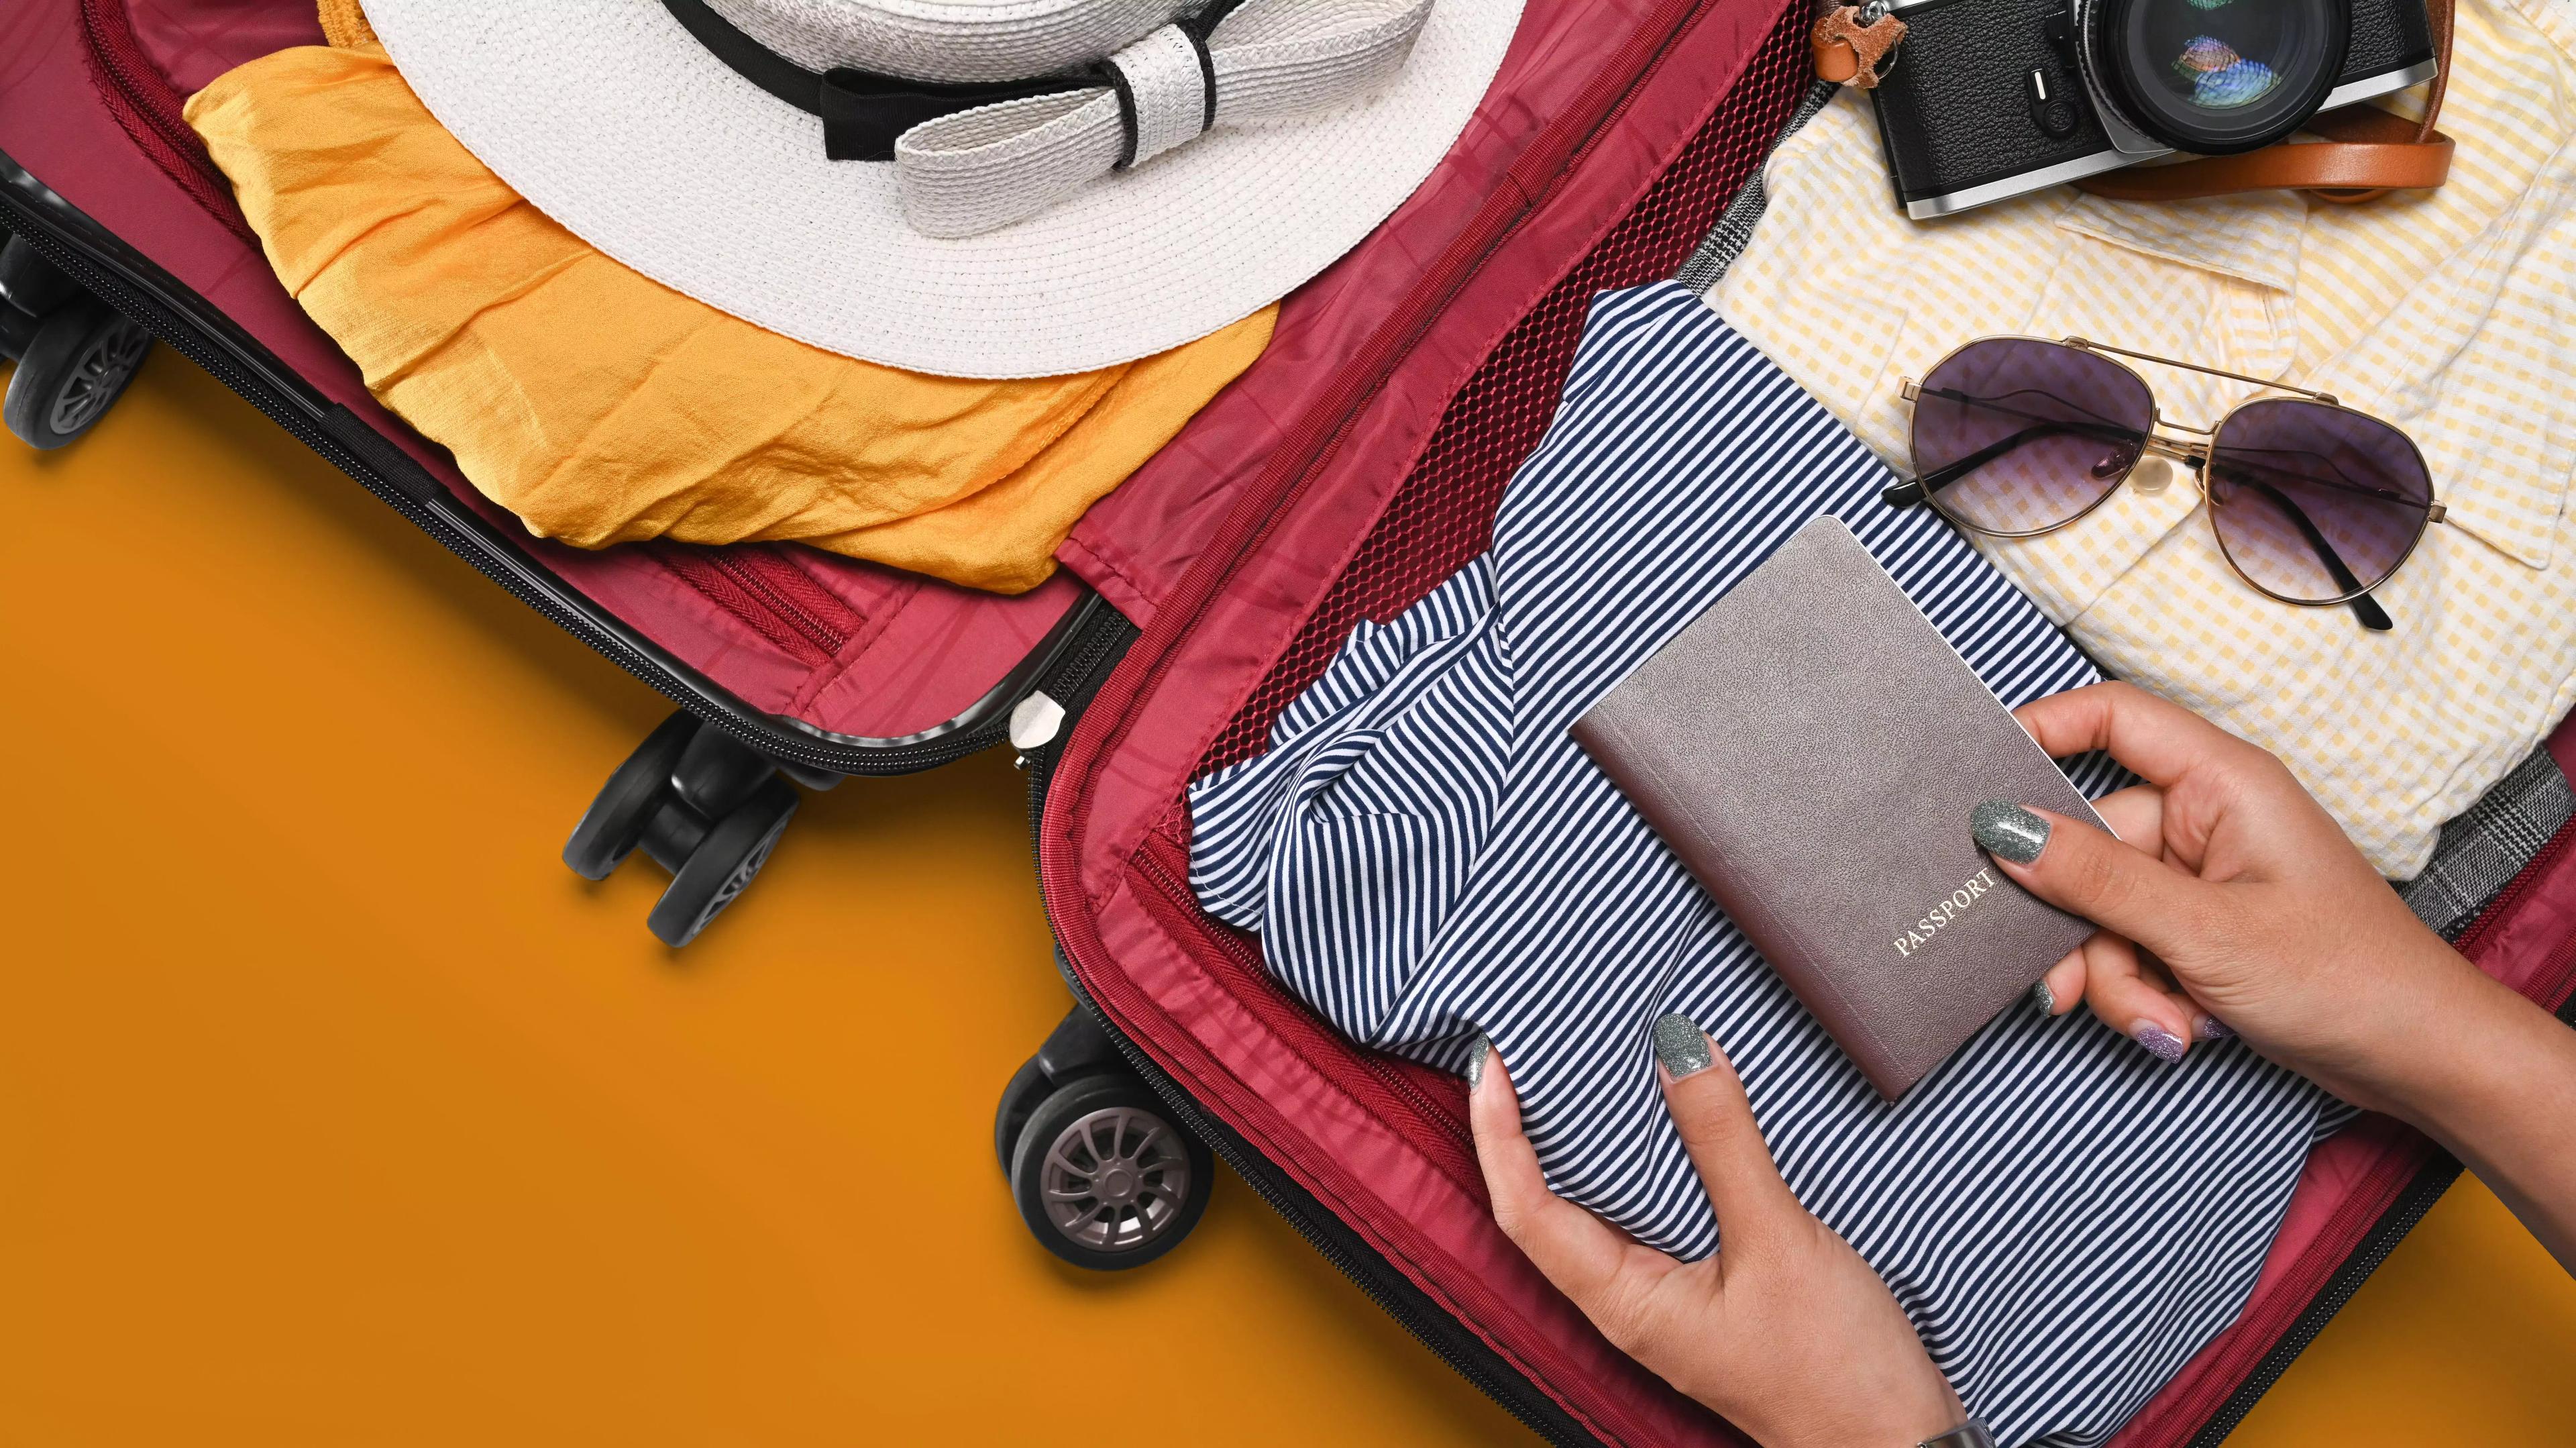 Travel without stress: the best tricks to pack your suitcase